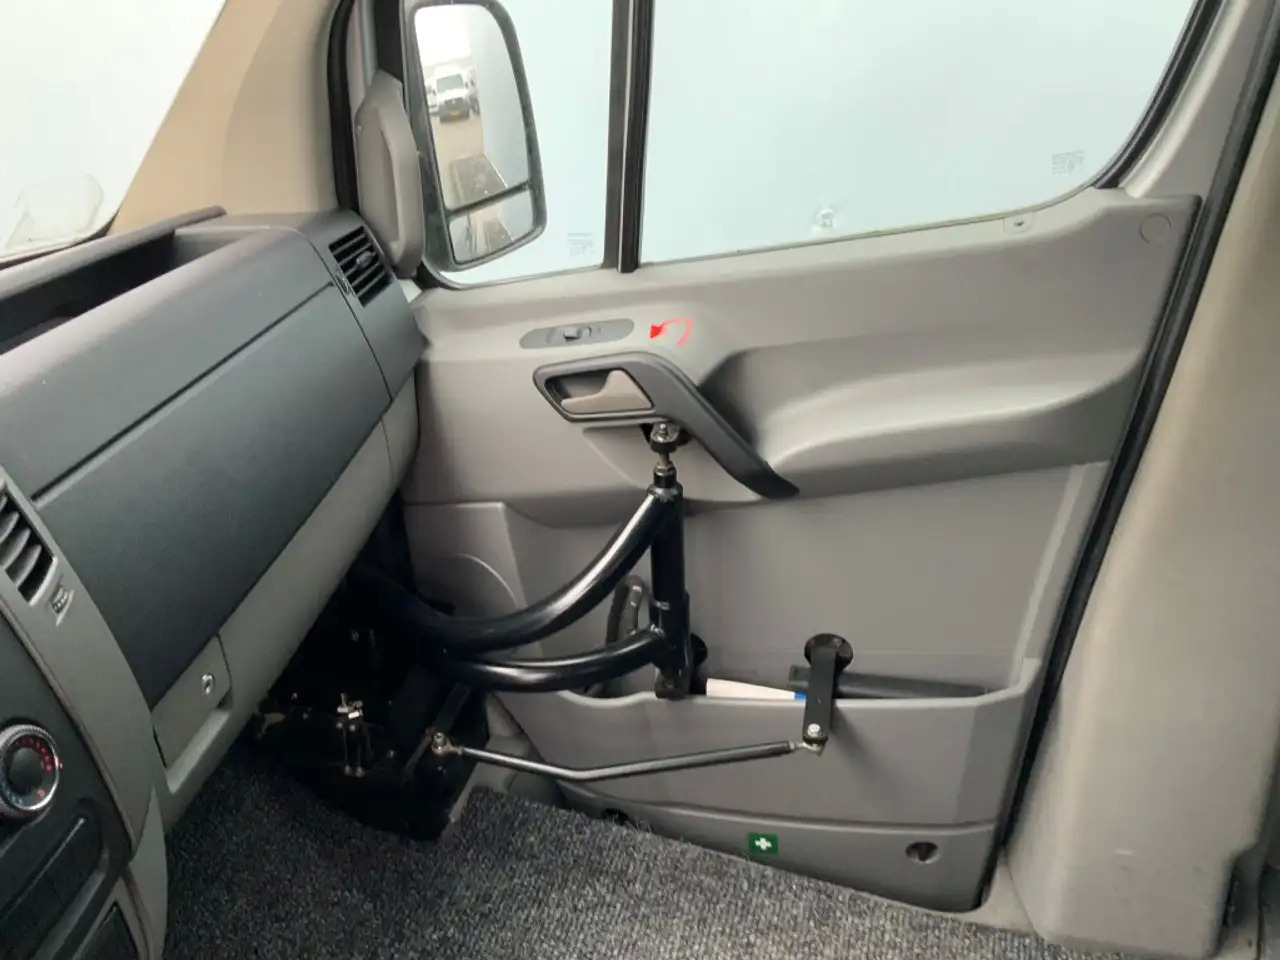 Leasing Volkswagen Crafter 35 2.5 TDI L4H3 PersoneBus 19 pers Airco CameraTre Volkswagen Crafter 35 2.5 TDI L4H3 PersoneBus 19 pers Airco CameraTre: kuva Leasing Volkswagen Crafter 35 2.5 TDI L4H3 PersoneBus 19 pers Airco CameraTre Volkswagen Crafter 35 2.5 TDI L4H3 PersoneBus 19 pers Airco CameraTre